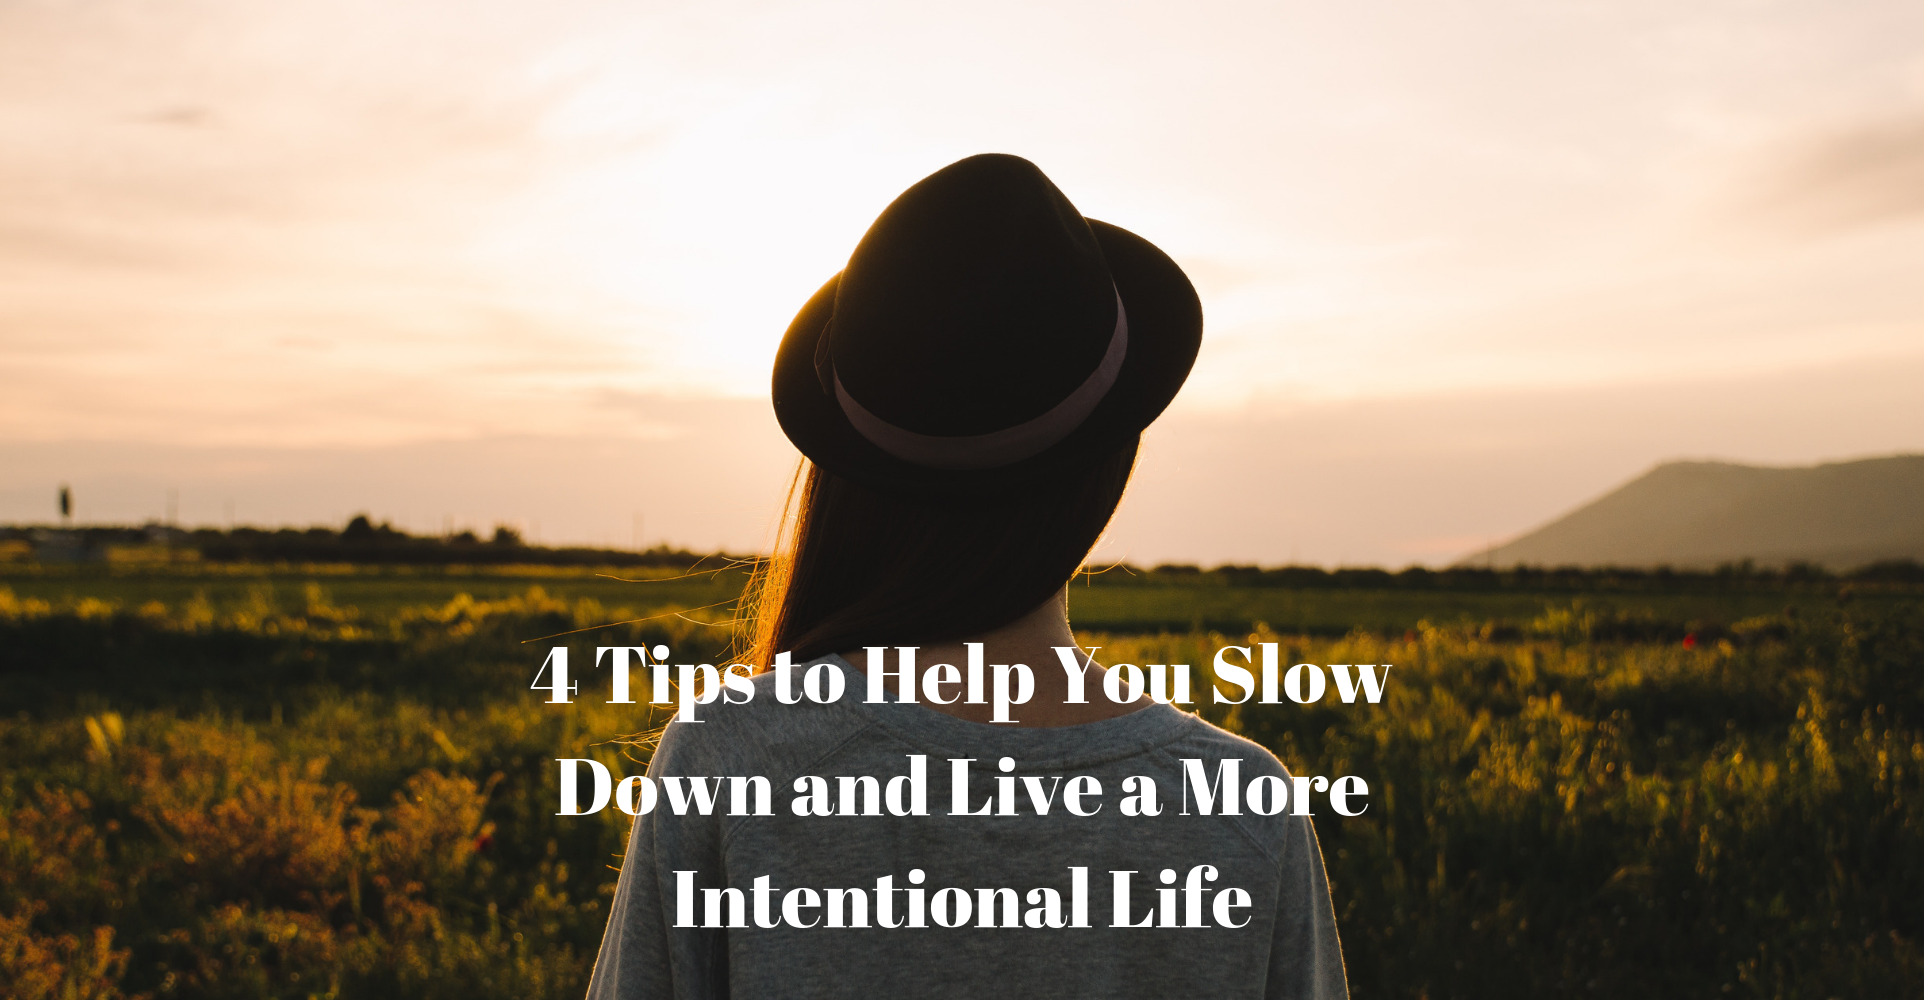 4 tips to help you slow down and live a more intentional life